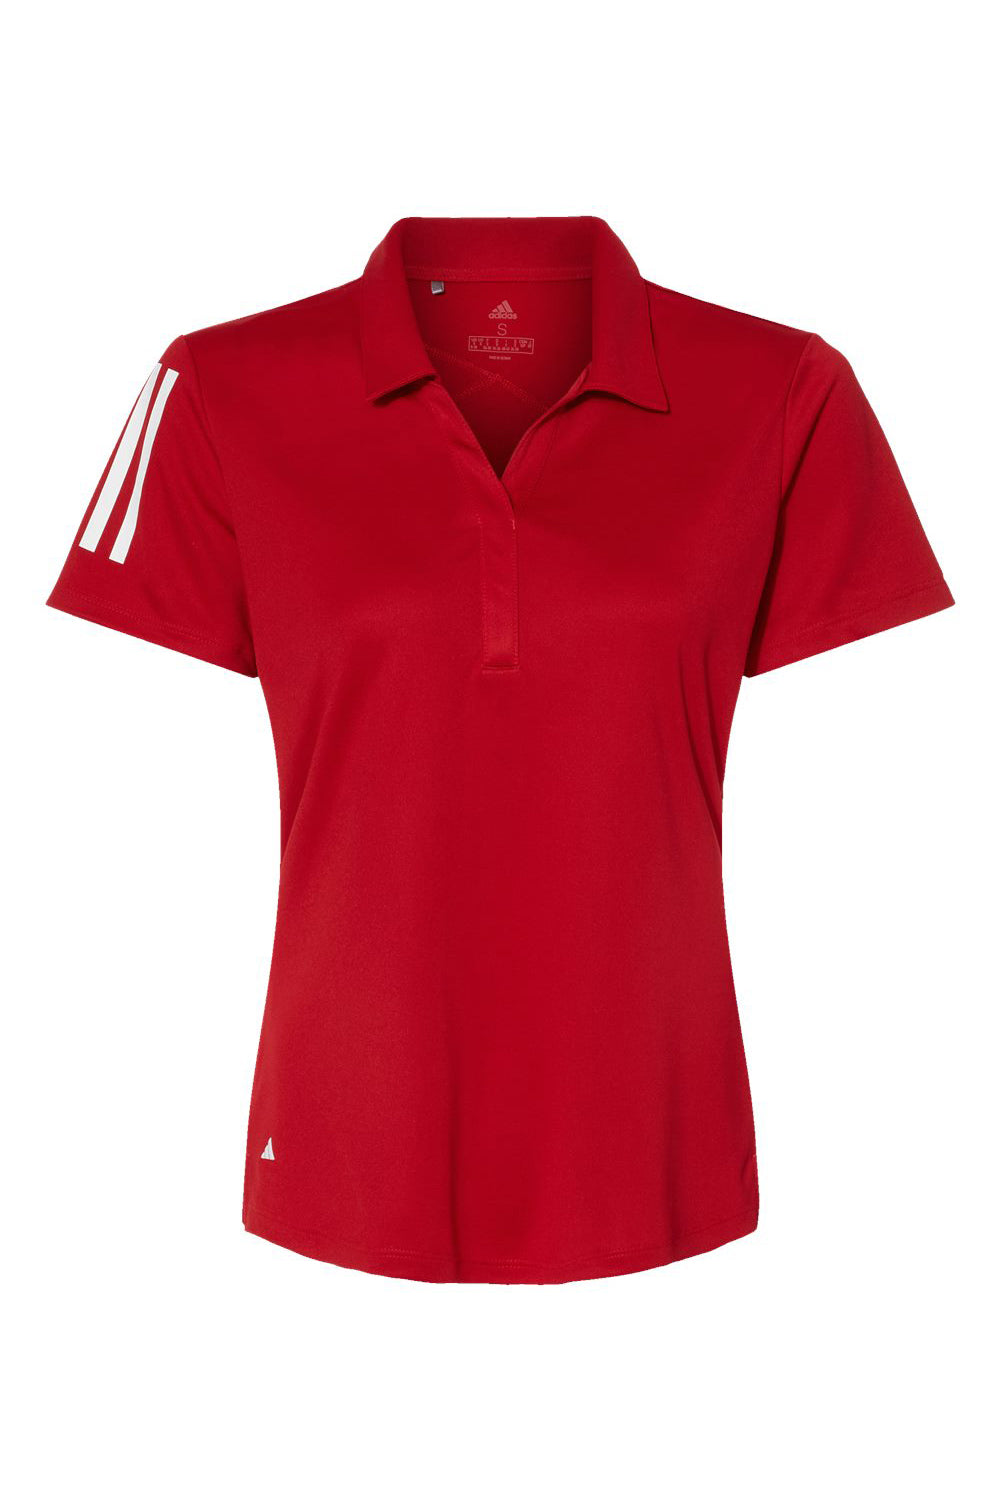 Adidas A481 Womens Floating 3 UPF 50+ Stripes Short Sleeve Polo Shirt Team Power Red/White Flat Front